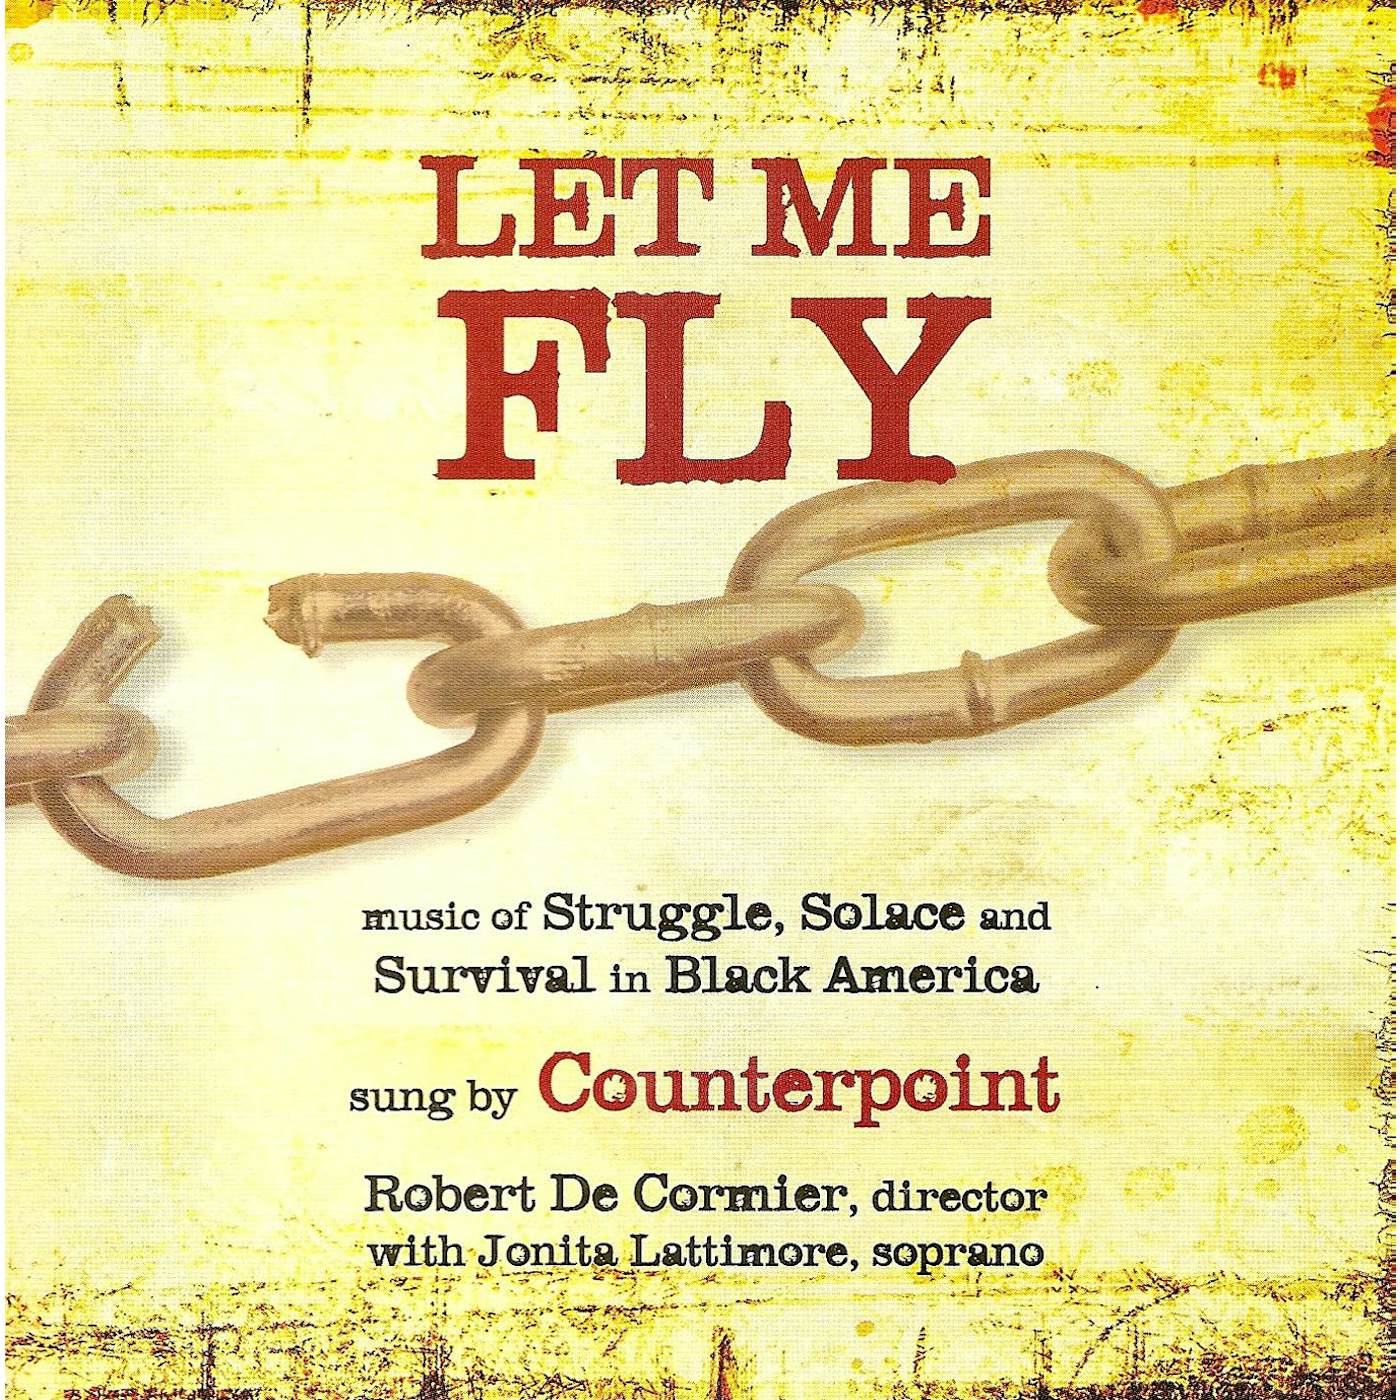 Counterpoint LET ME FLY: MUSIC OF STRUGLE SOLACE & SURVIVAL IN CD